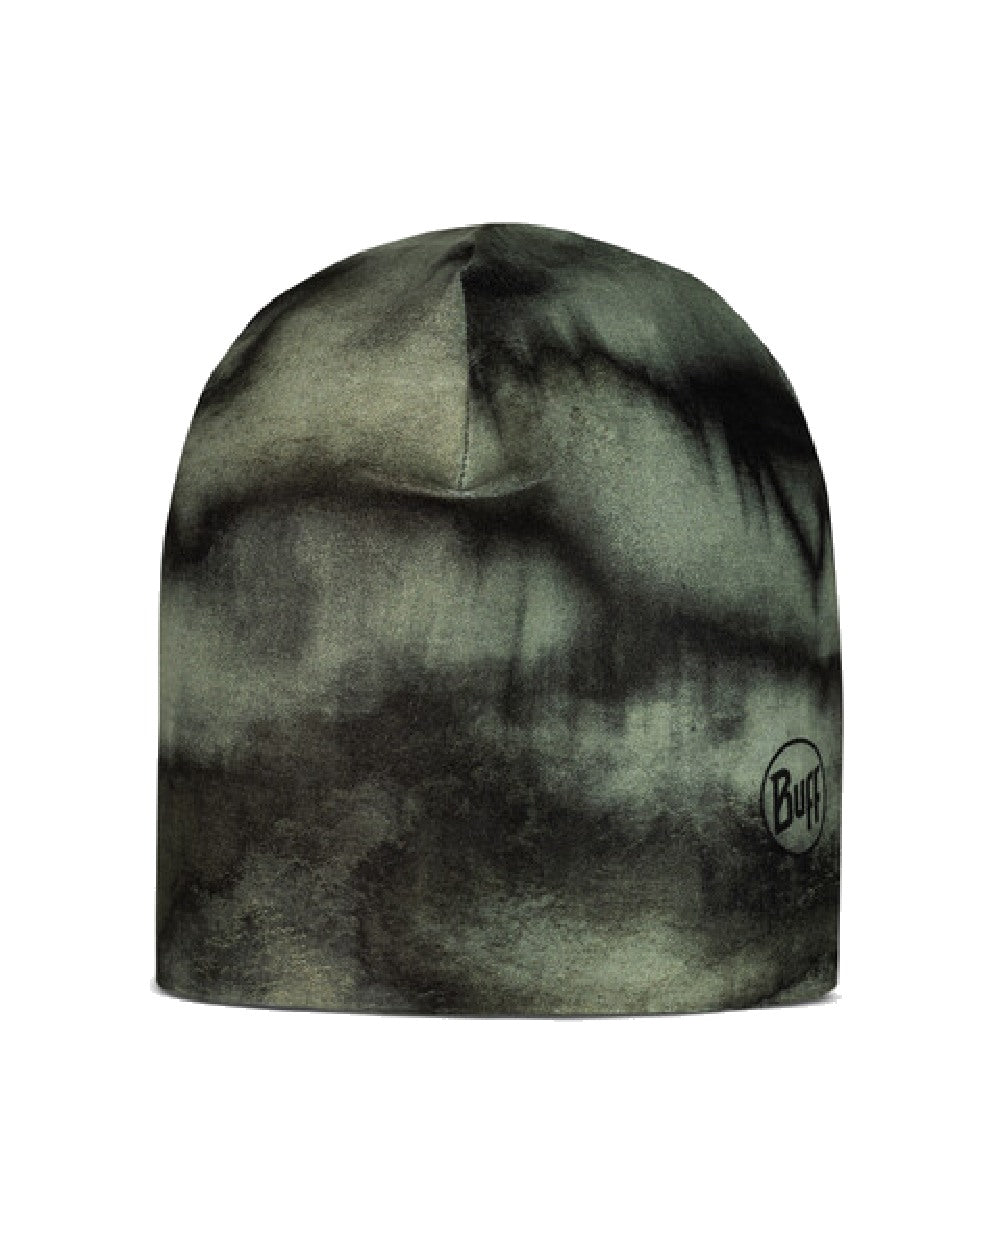 Buff Thermonet Beanie in Fust Camouflage 